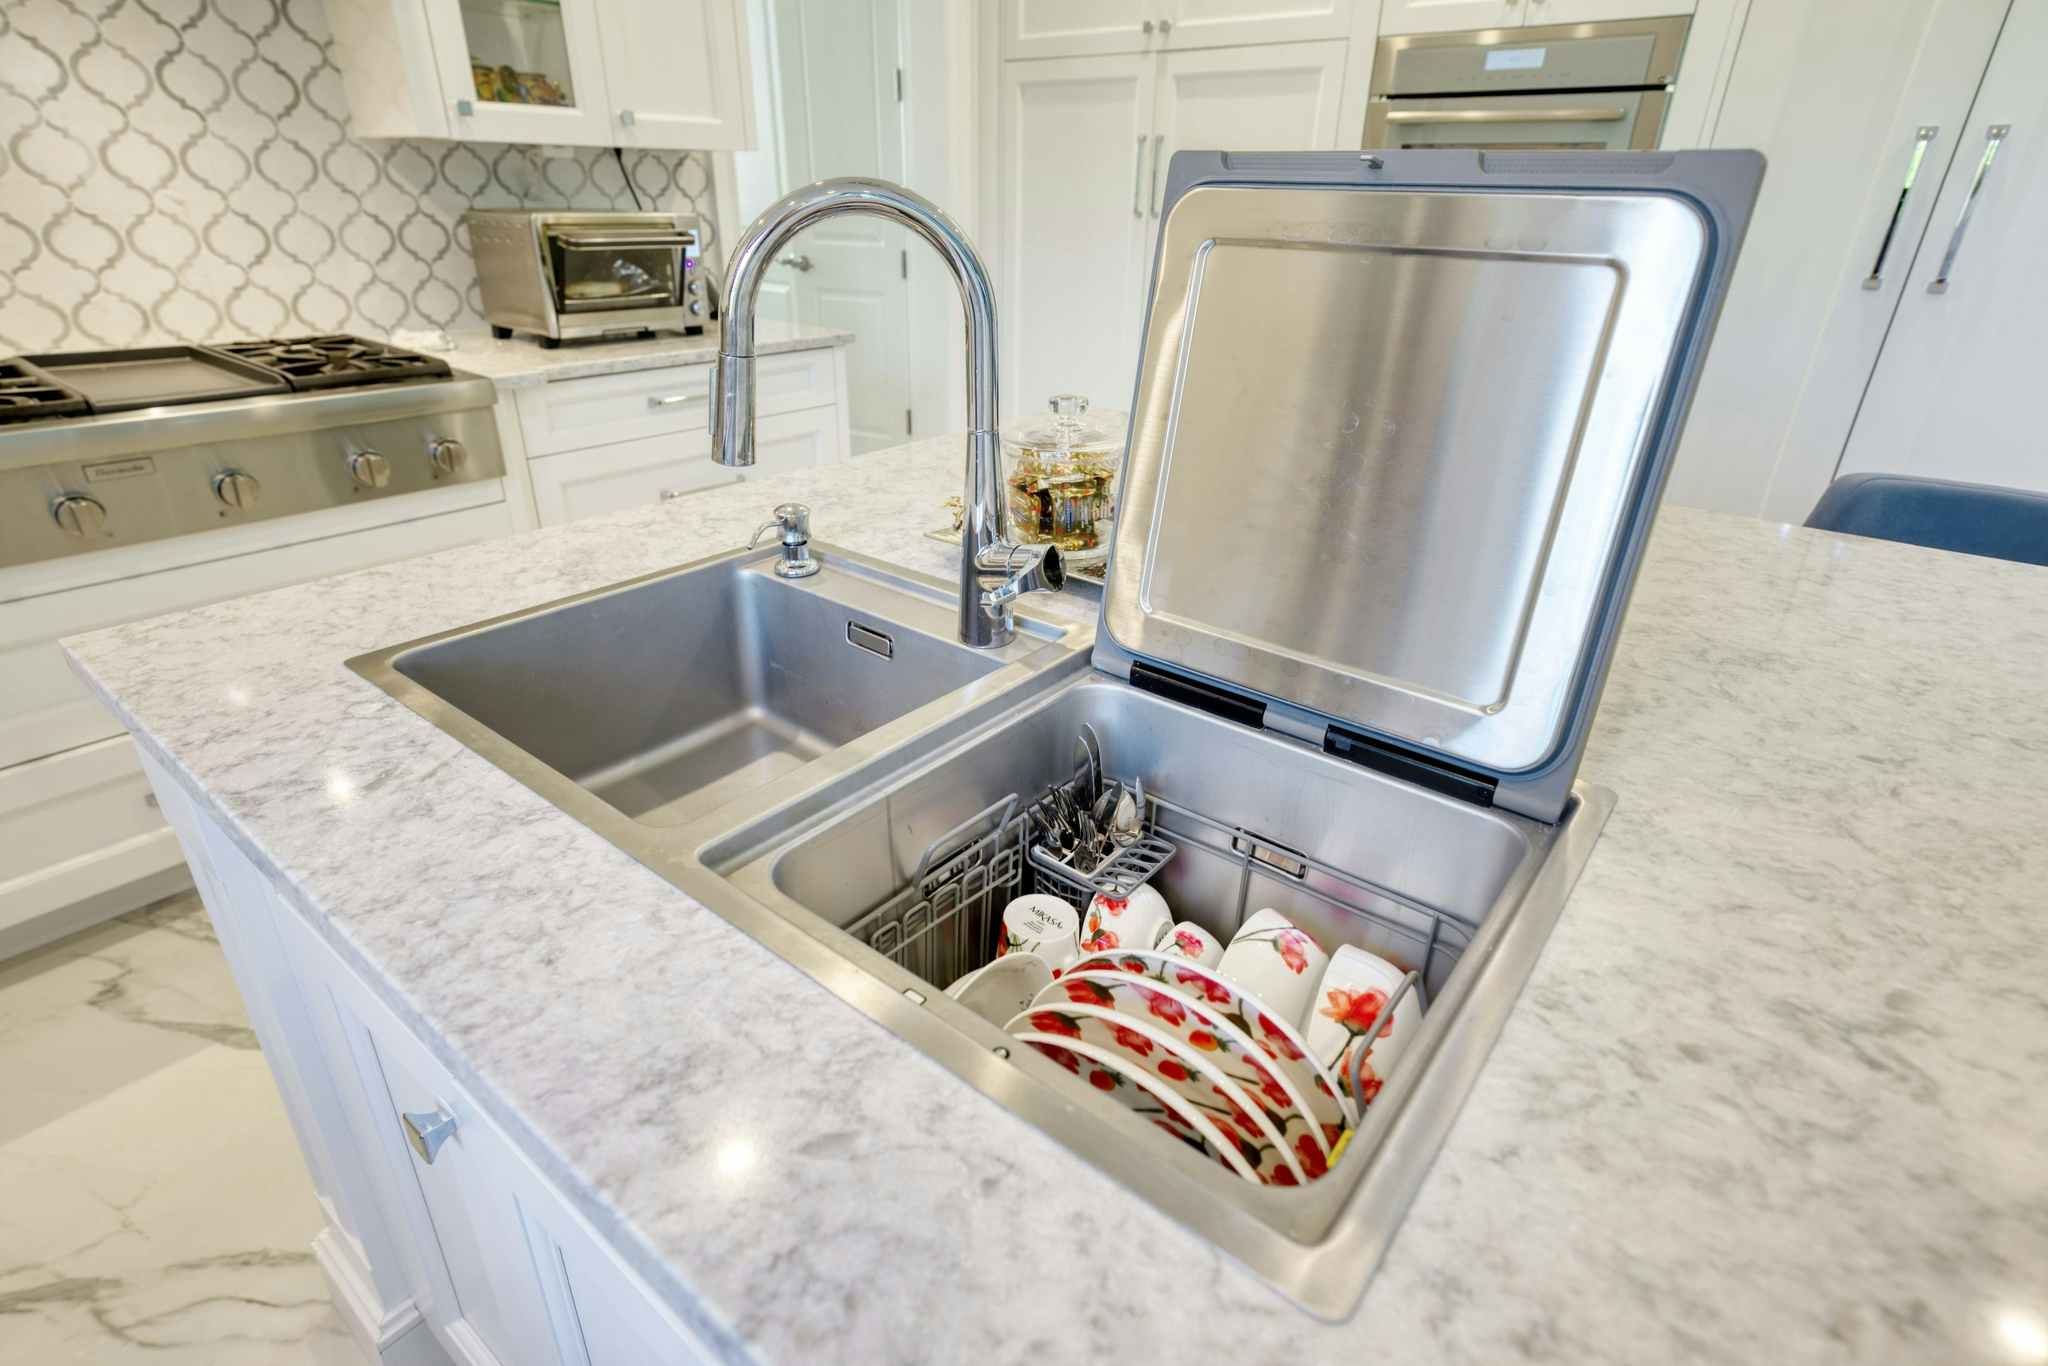 A Fotile sink & dishwasher combination in someone's kitchen